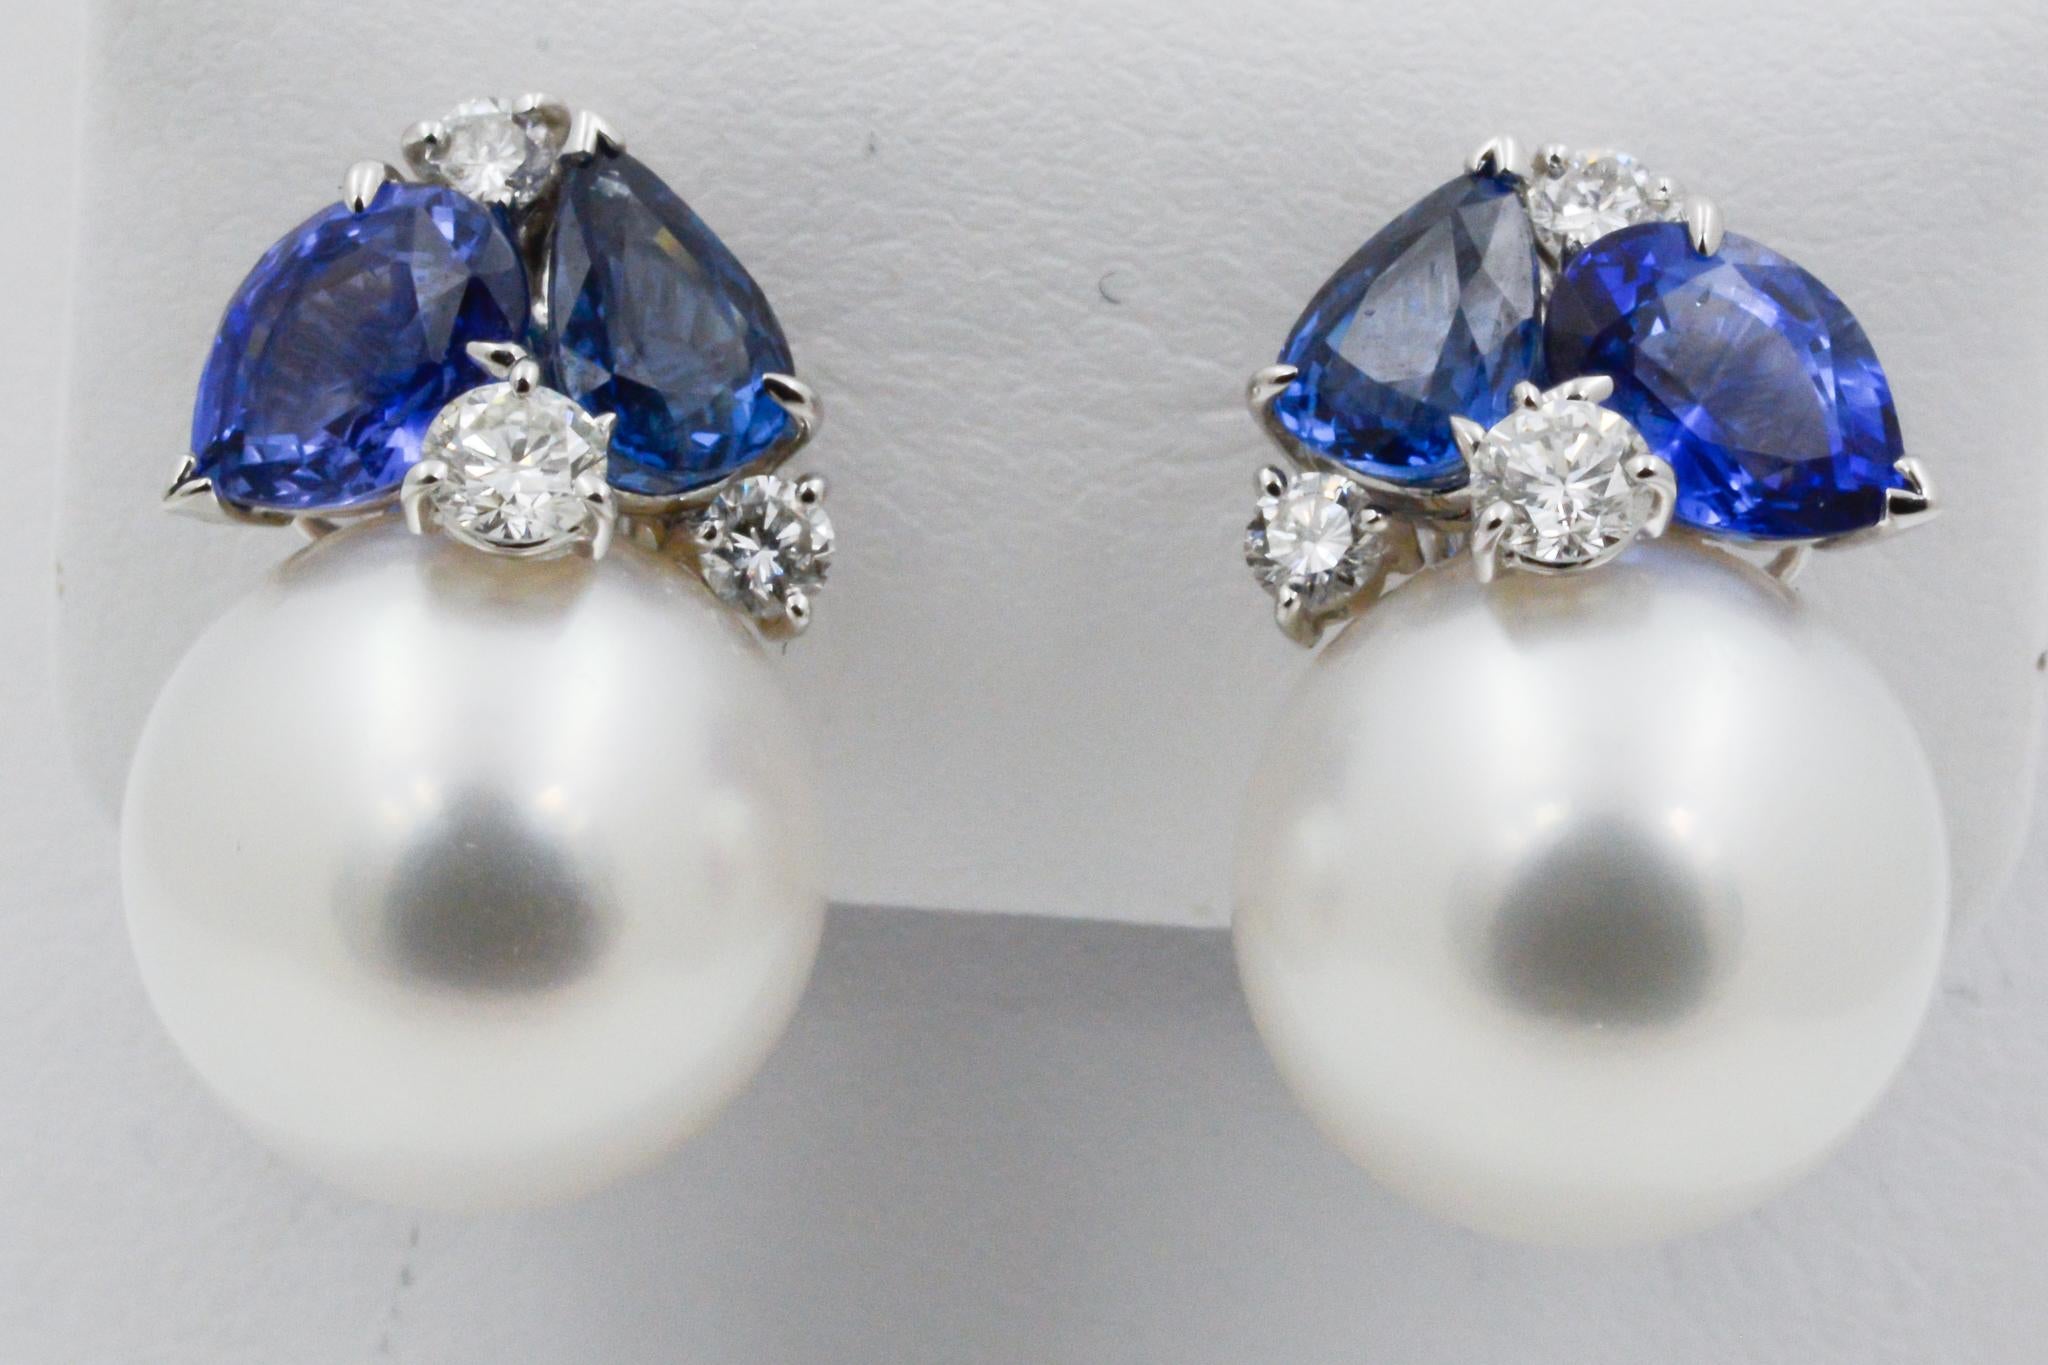 From Seaman Schepps, these 18k white gold feature 14mm white south sea pearl and four pear shaped blue sapphires (4.07ctw) and six round brilliant cut diamonds (.58ctw). Signed Seaman Schepps. 

